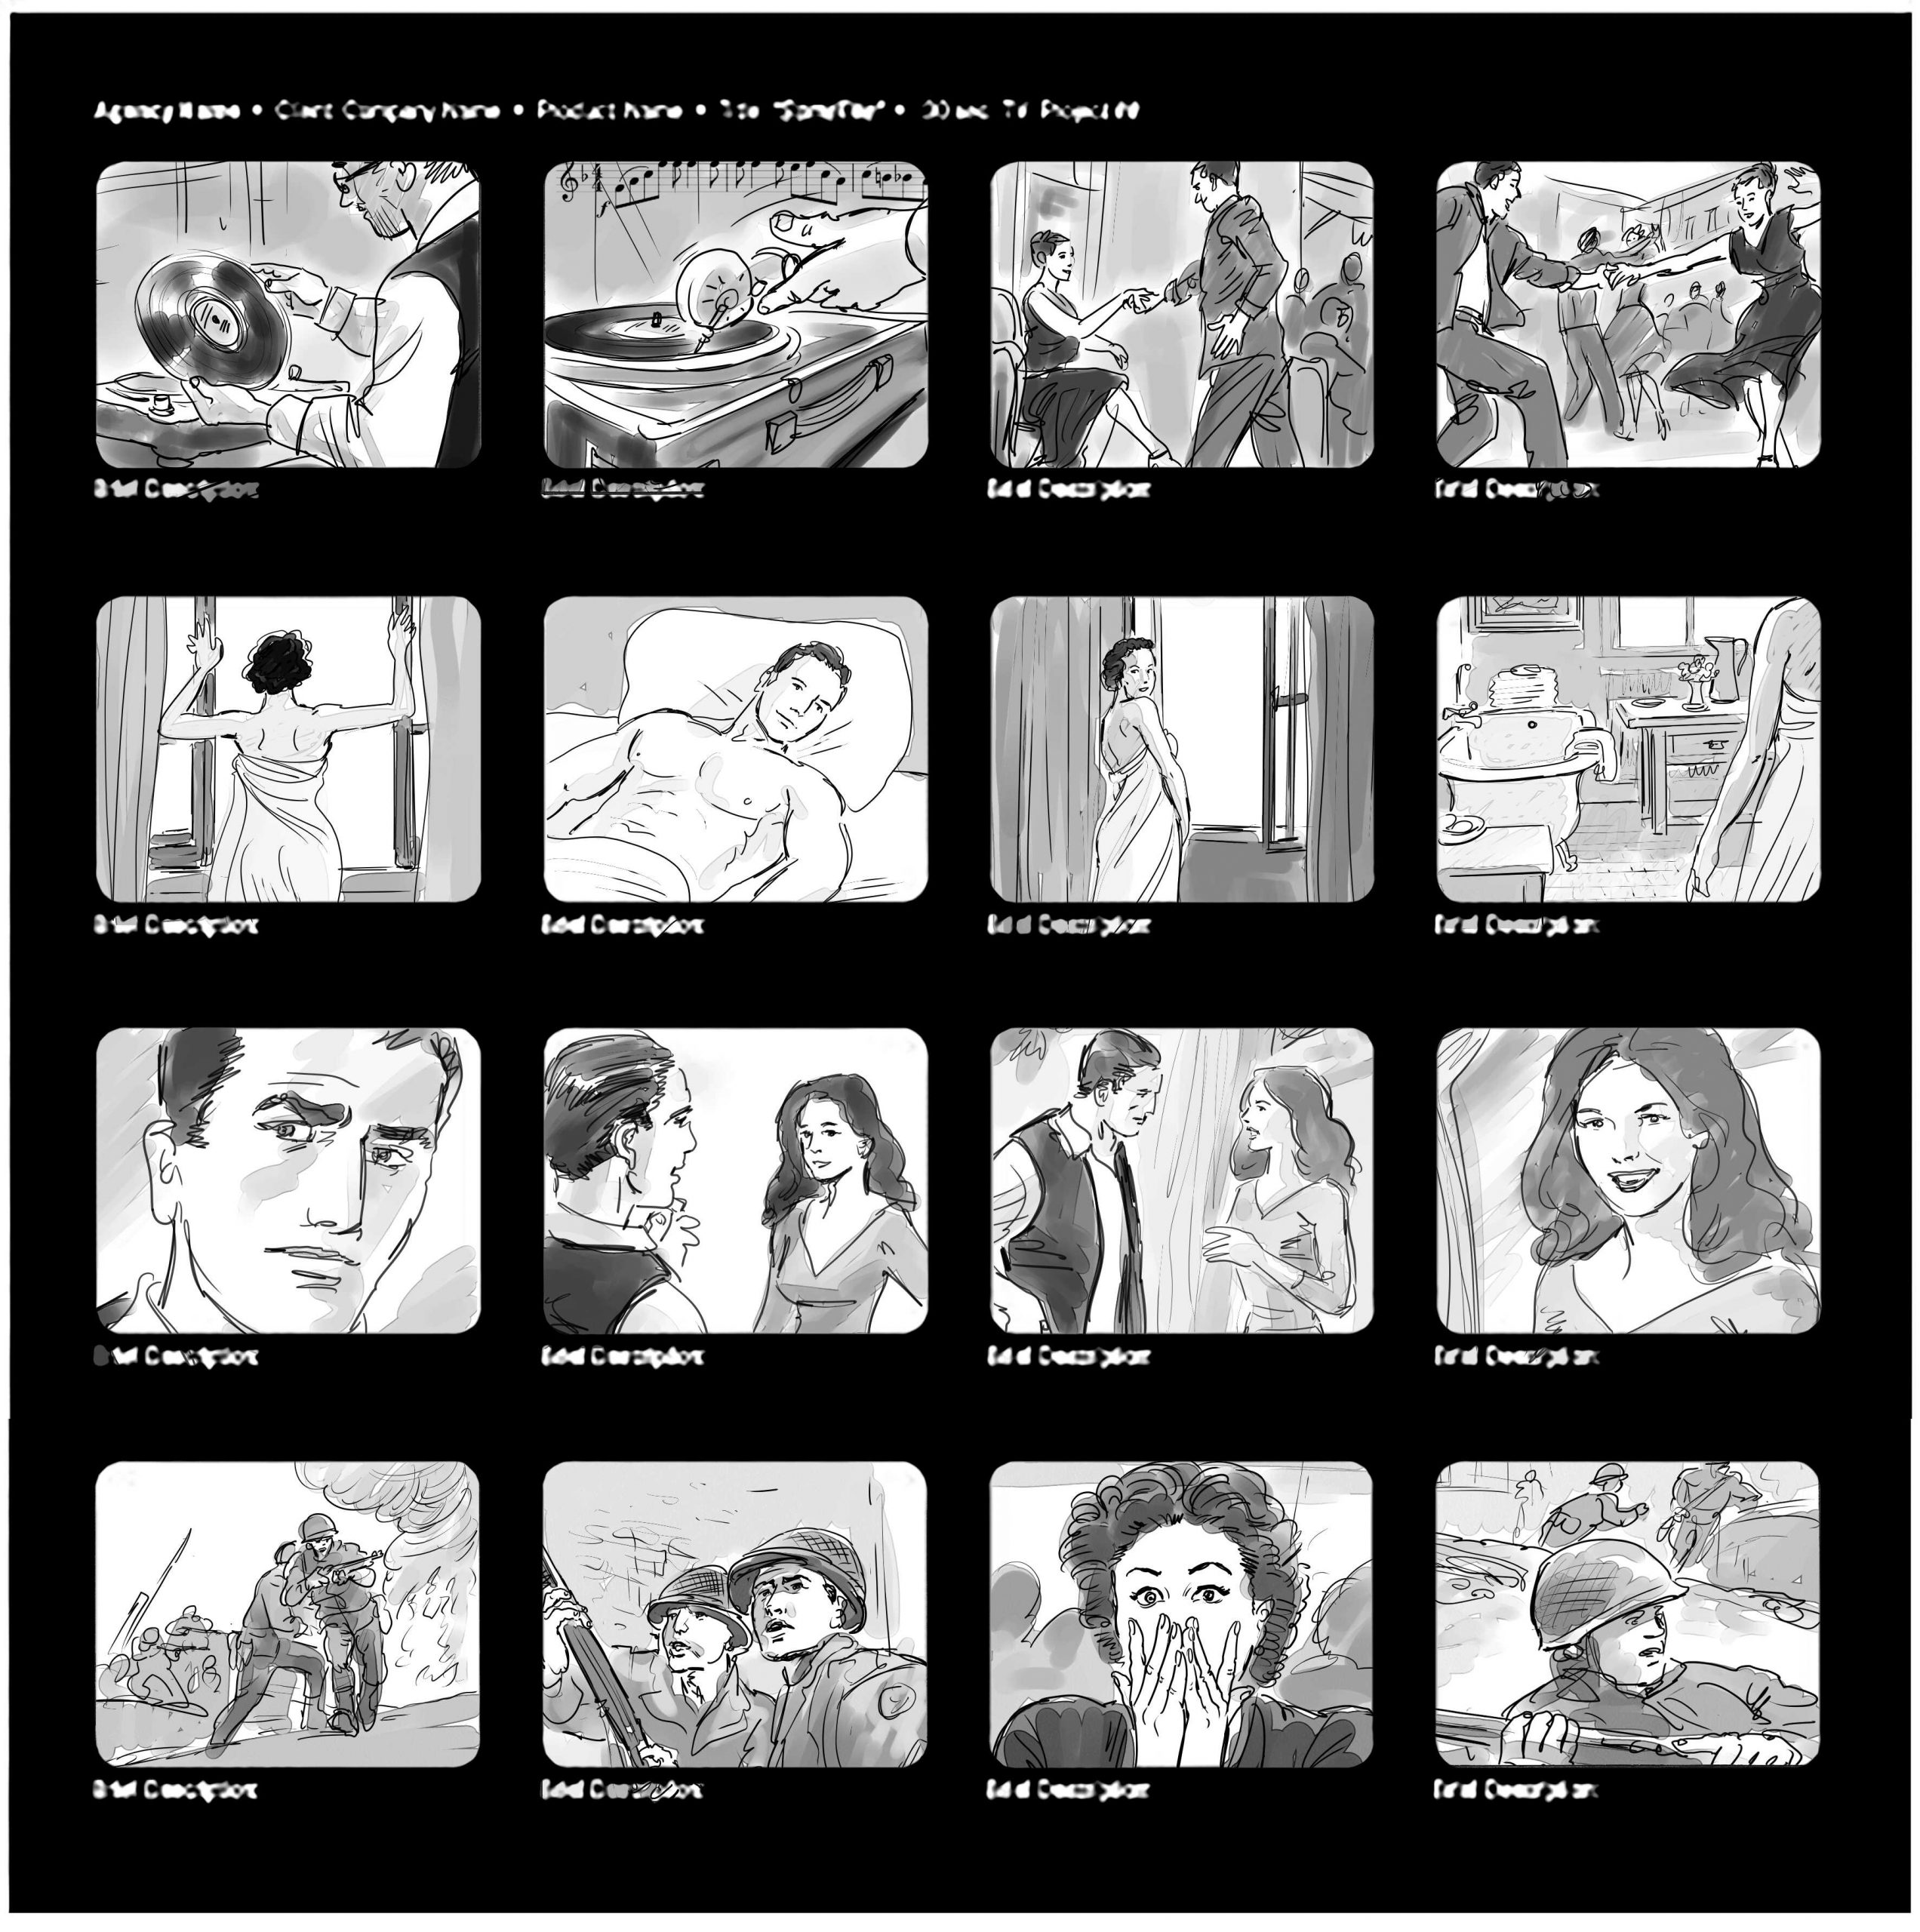 Looking for a storyboard?